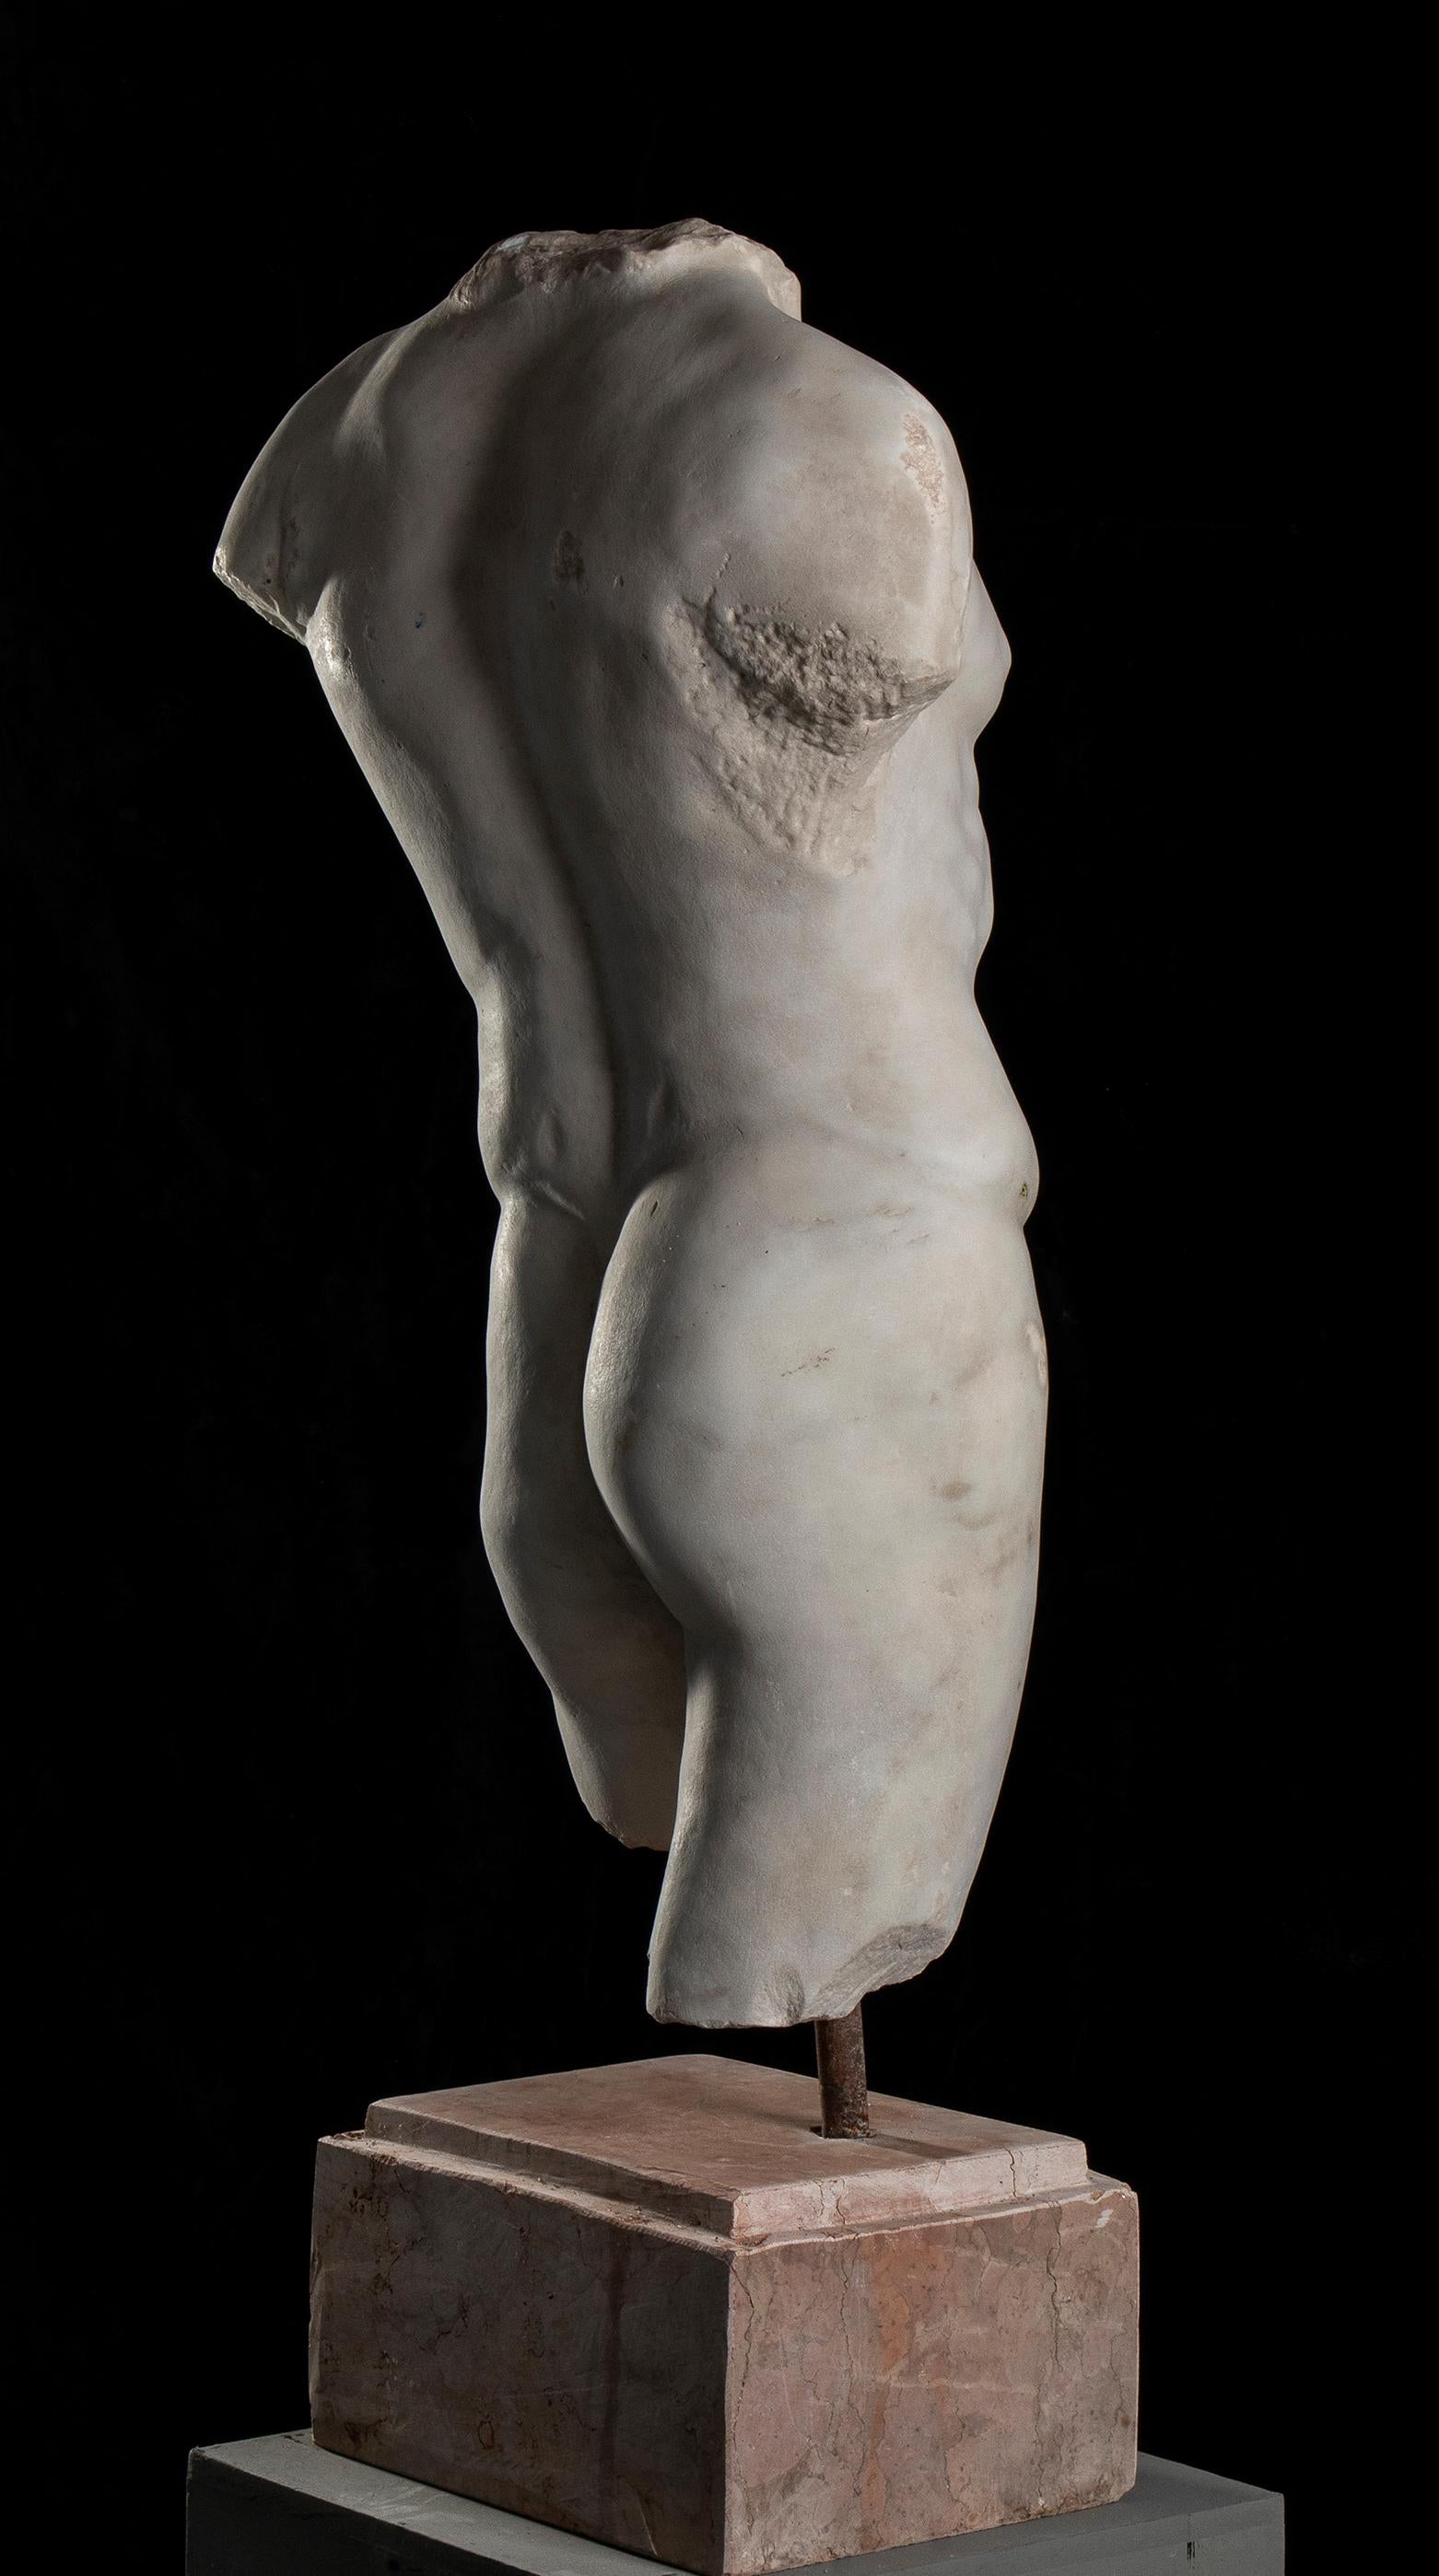 Statuary Italian Marble Sculpture of Torso Classical Roman of Athlete or God  - Black Nude Sculpture by Unknown